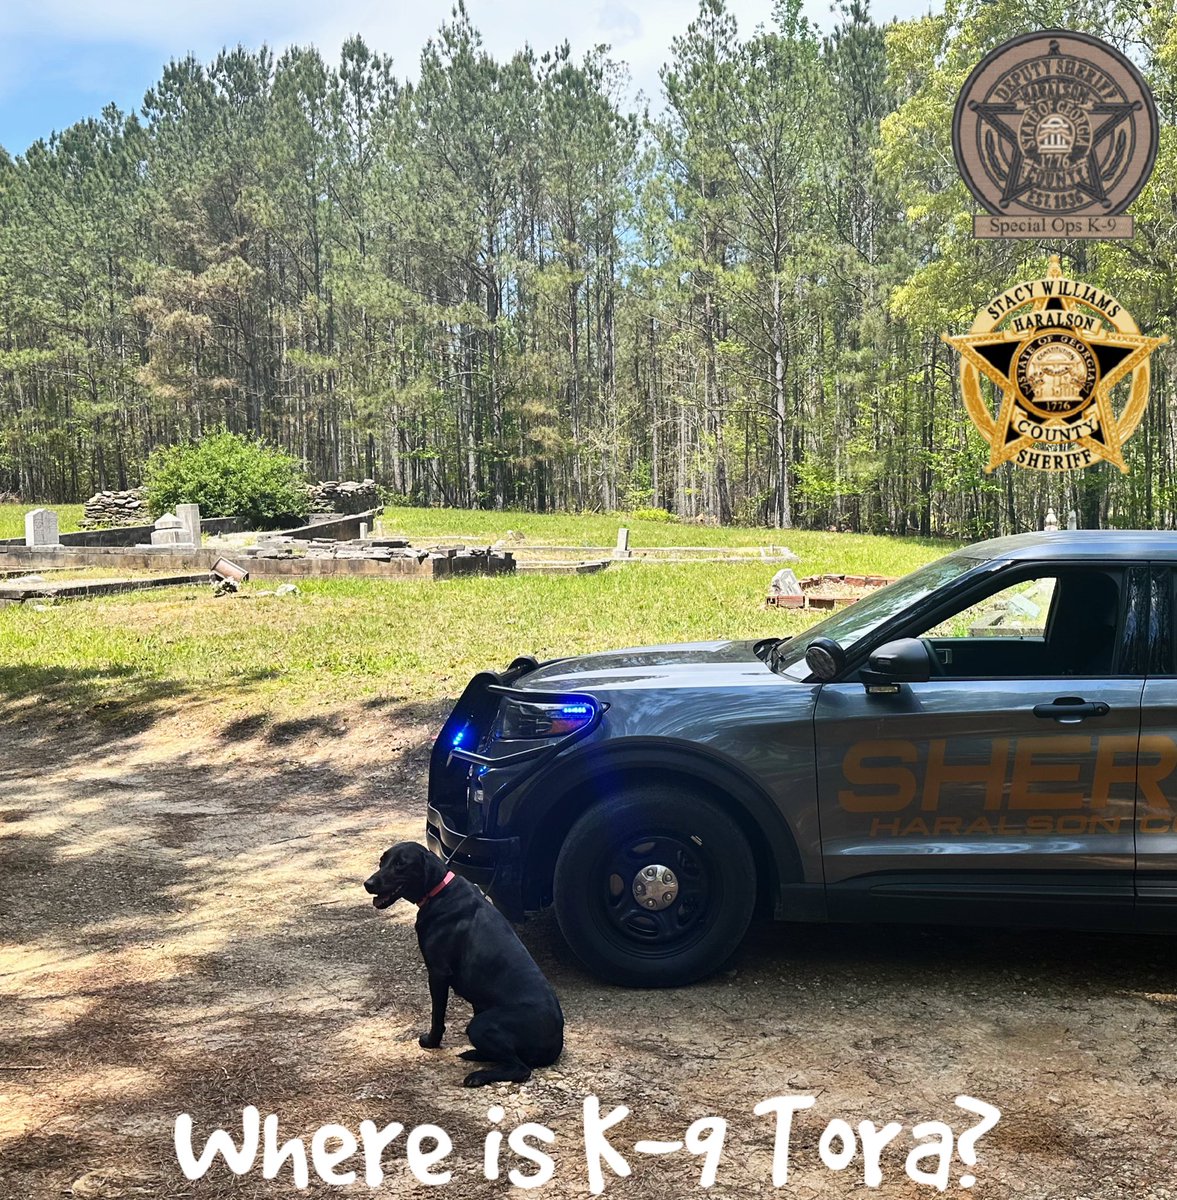 It’s time for Where is K-9 Tora Wednesday!! We think Sgt. Kirkland found the perfect location this week. So y’all, where is K-9 Tora? *Correct answers will be out in a drawing for a K-9 Tora trading card. #WhereIsK9Tora #CommunityEngagement #K9Tora🐾💙 #CSUK9 #HCSO